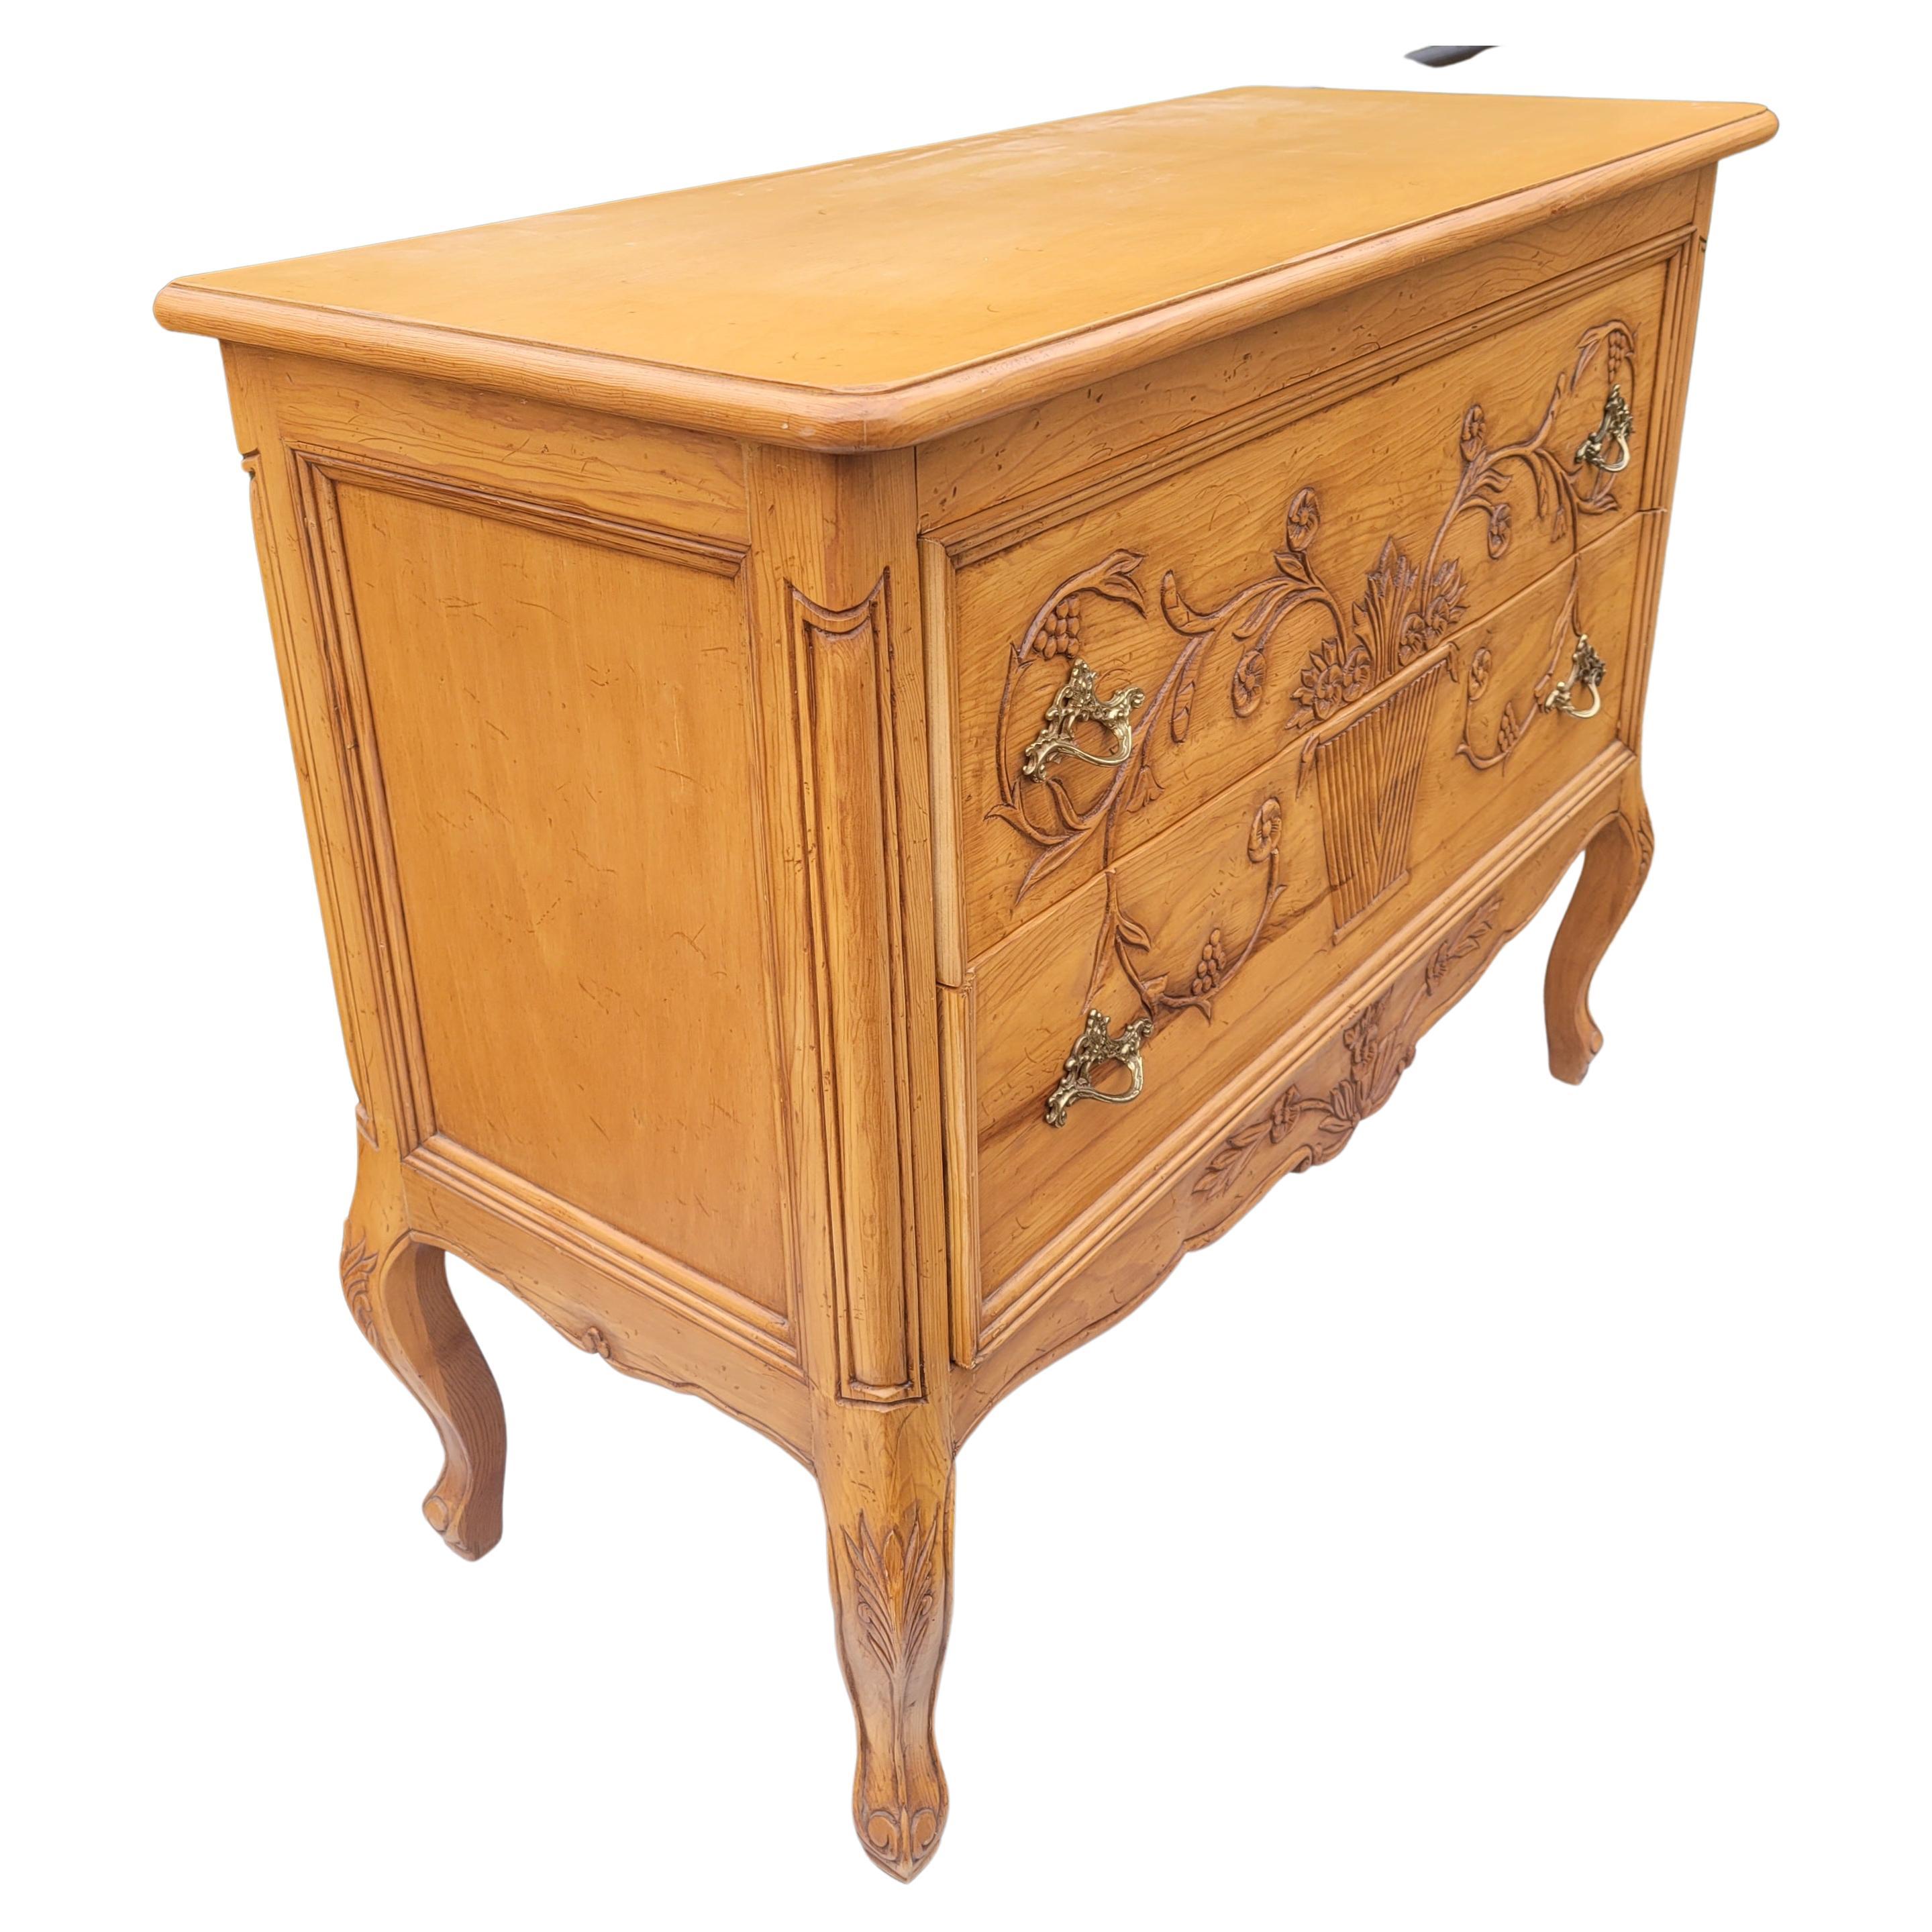 Wellesley Guild Hand-Carved Hand-Crafted Arts and Crafts Style Fruitwood Commode In Good Condition For Sale In Germantown, MD